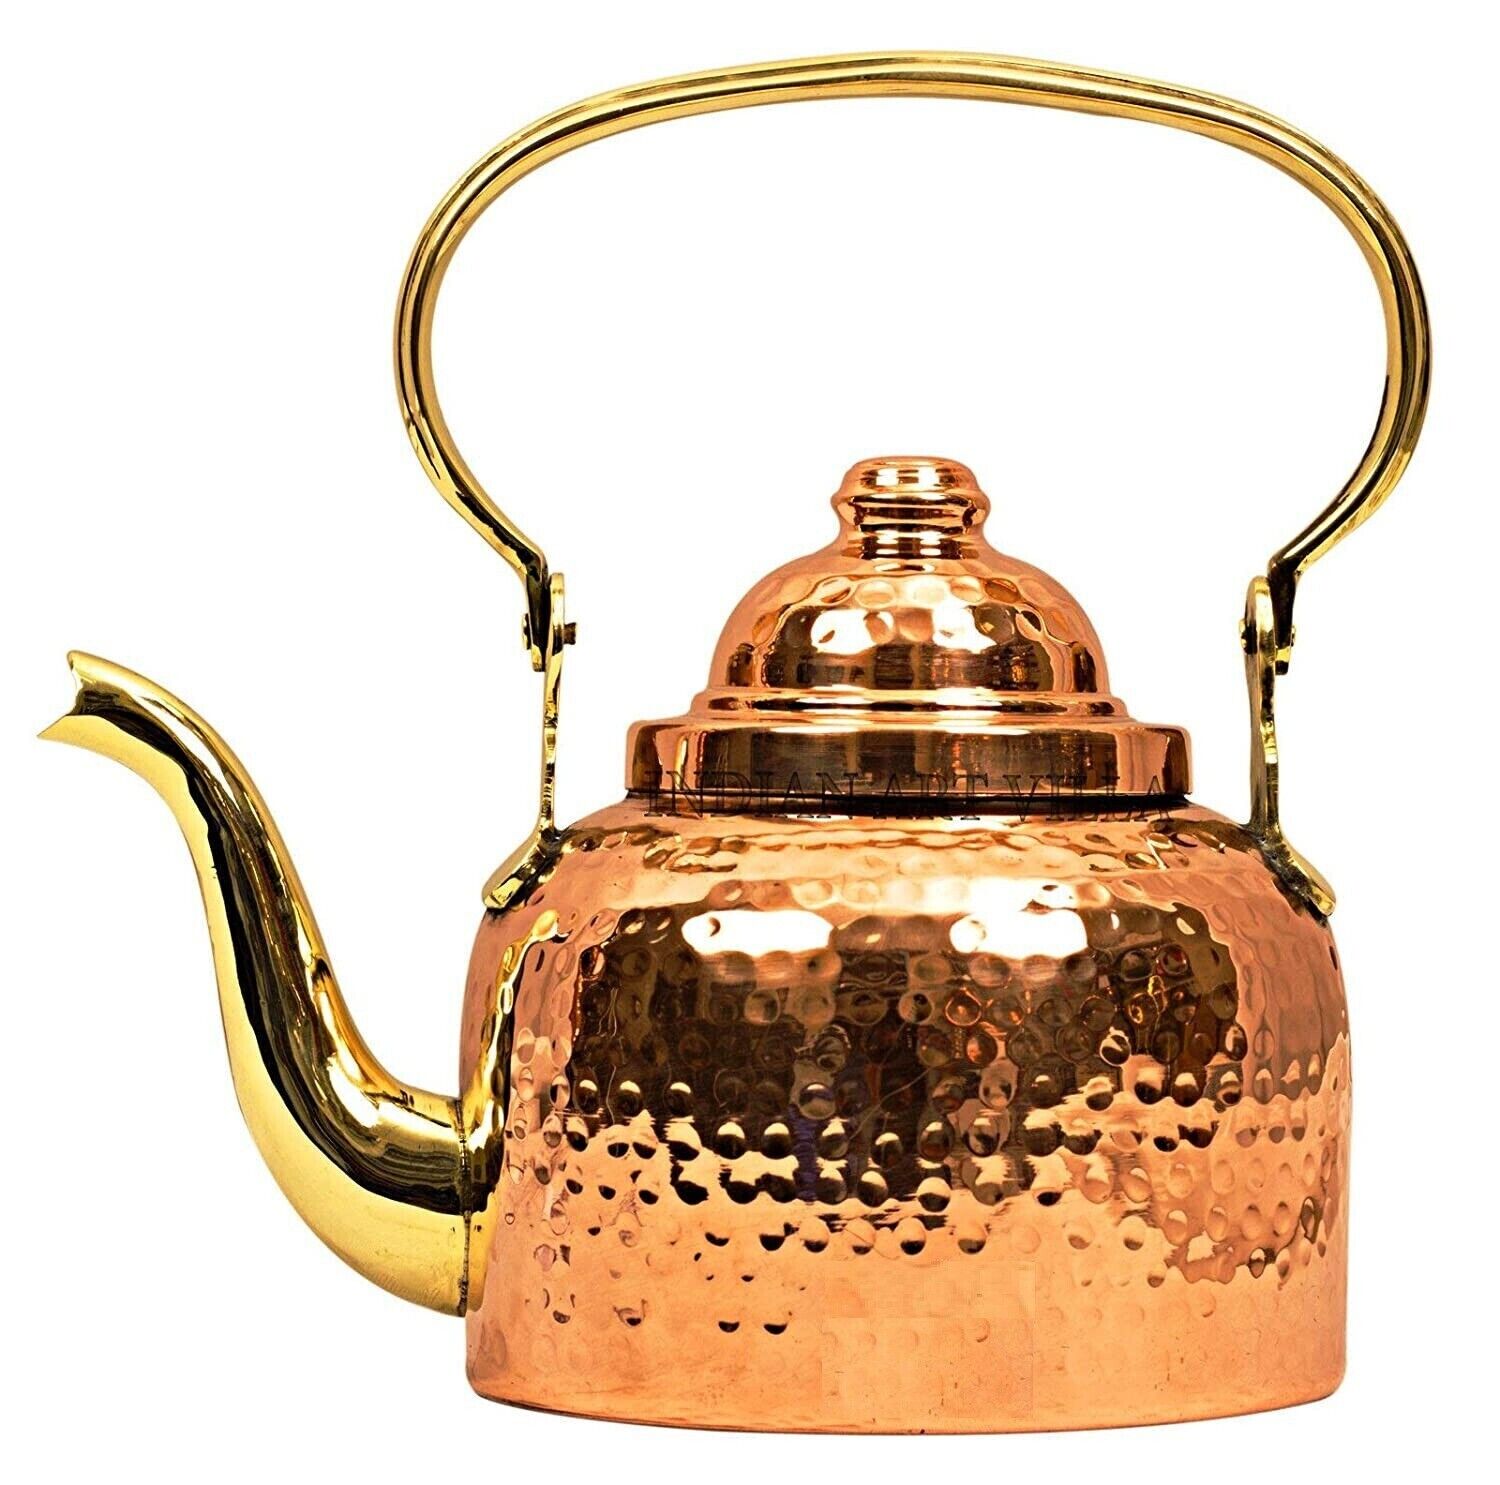 Traditional Pure Copper Tea Kettle Pot For Serveware 600 ml Inside Tin Lining